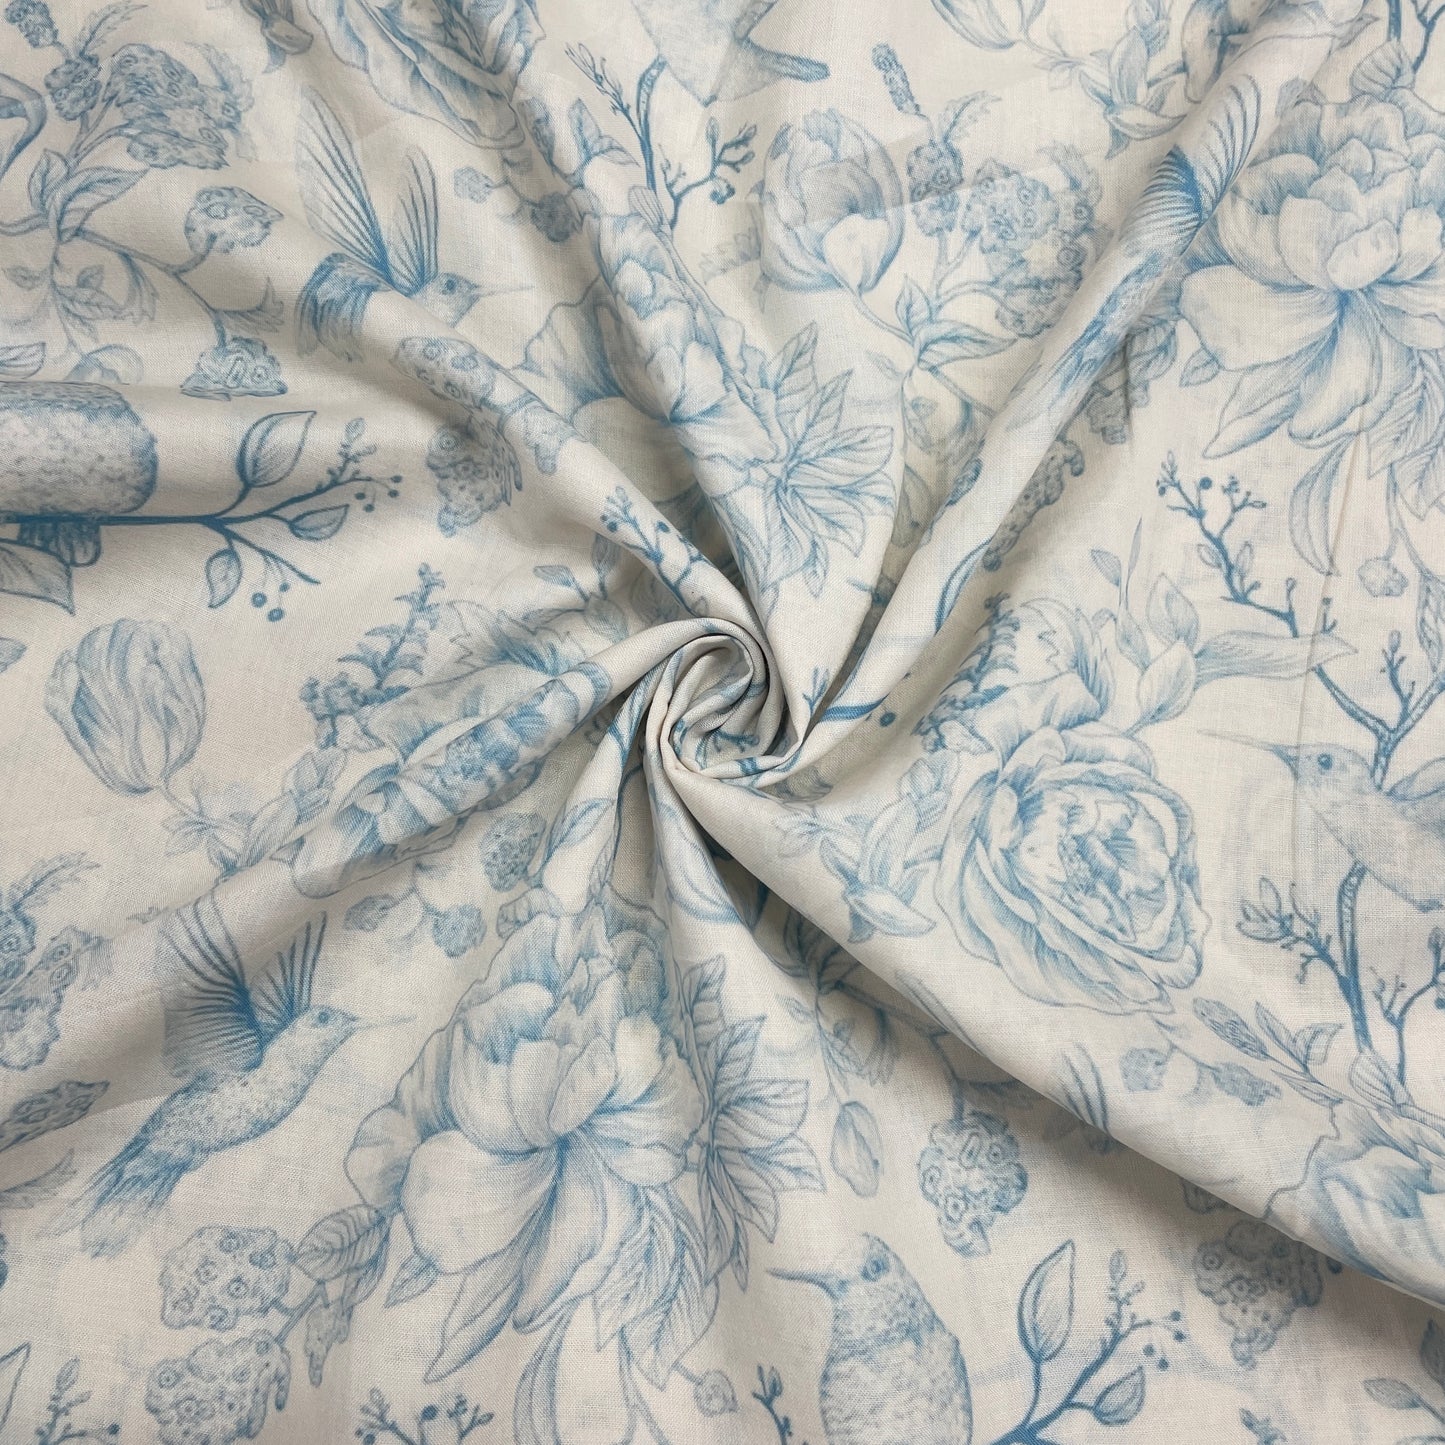 White With Blue Floral Print Muslin Fabric ,Plain Weave